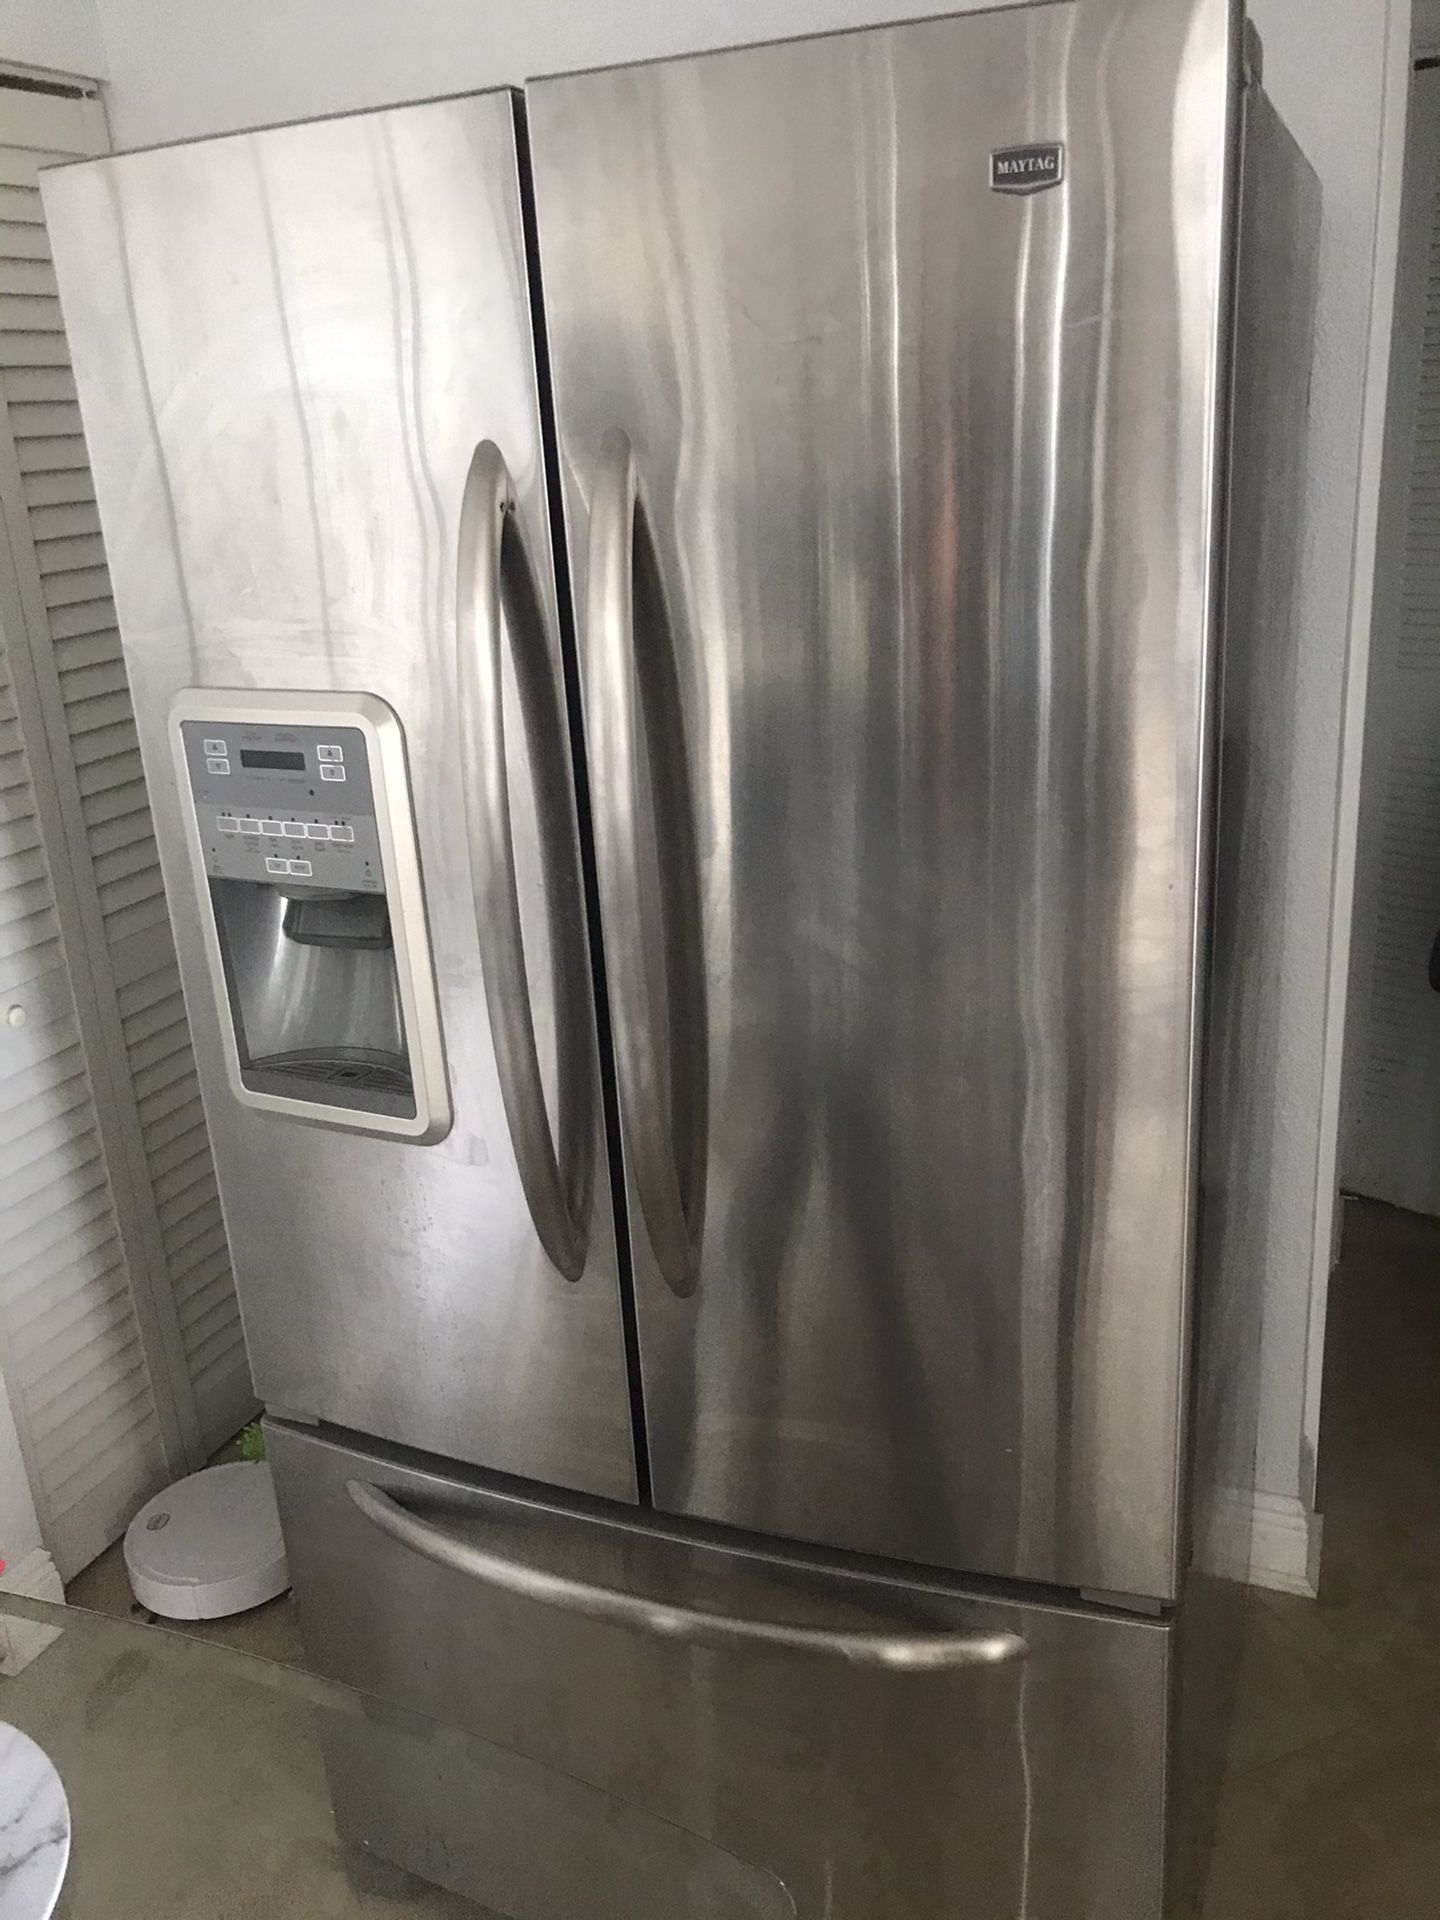 Maytag refrigerator in main condition, missing main board,